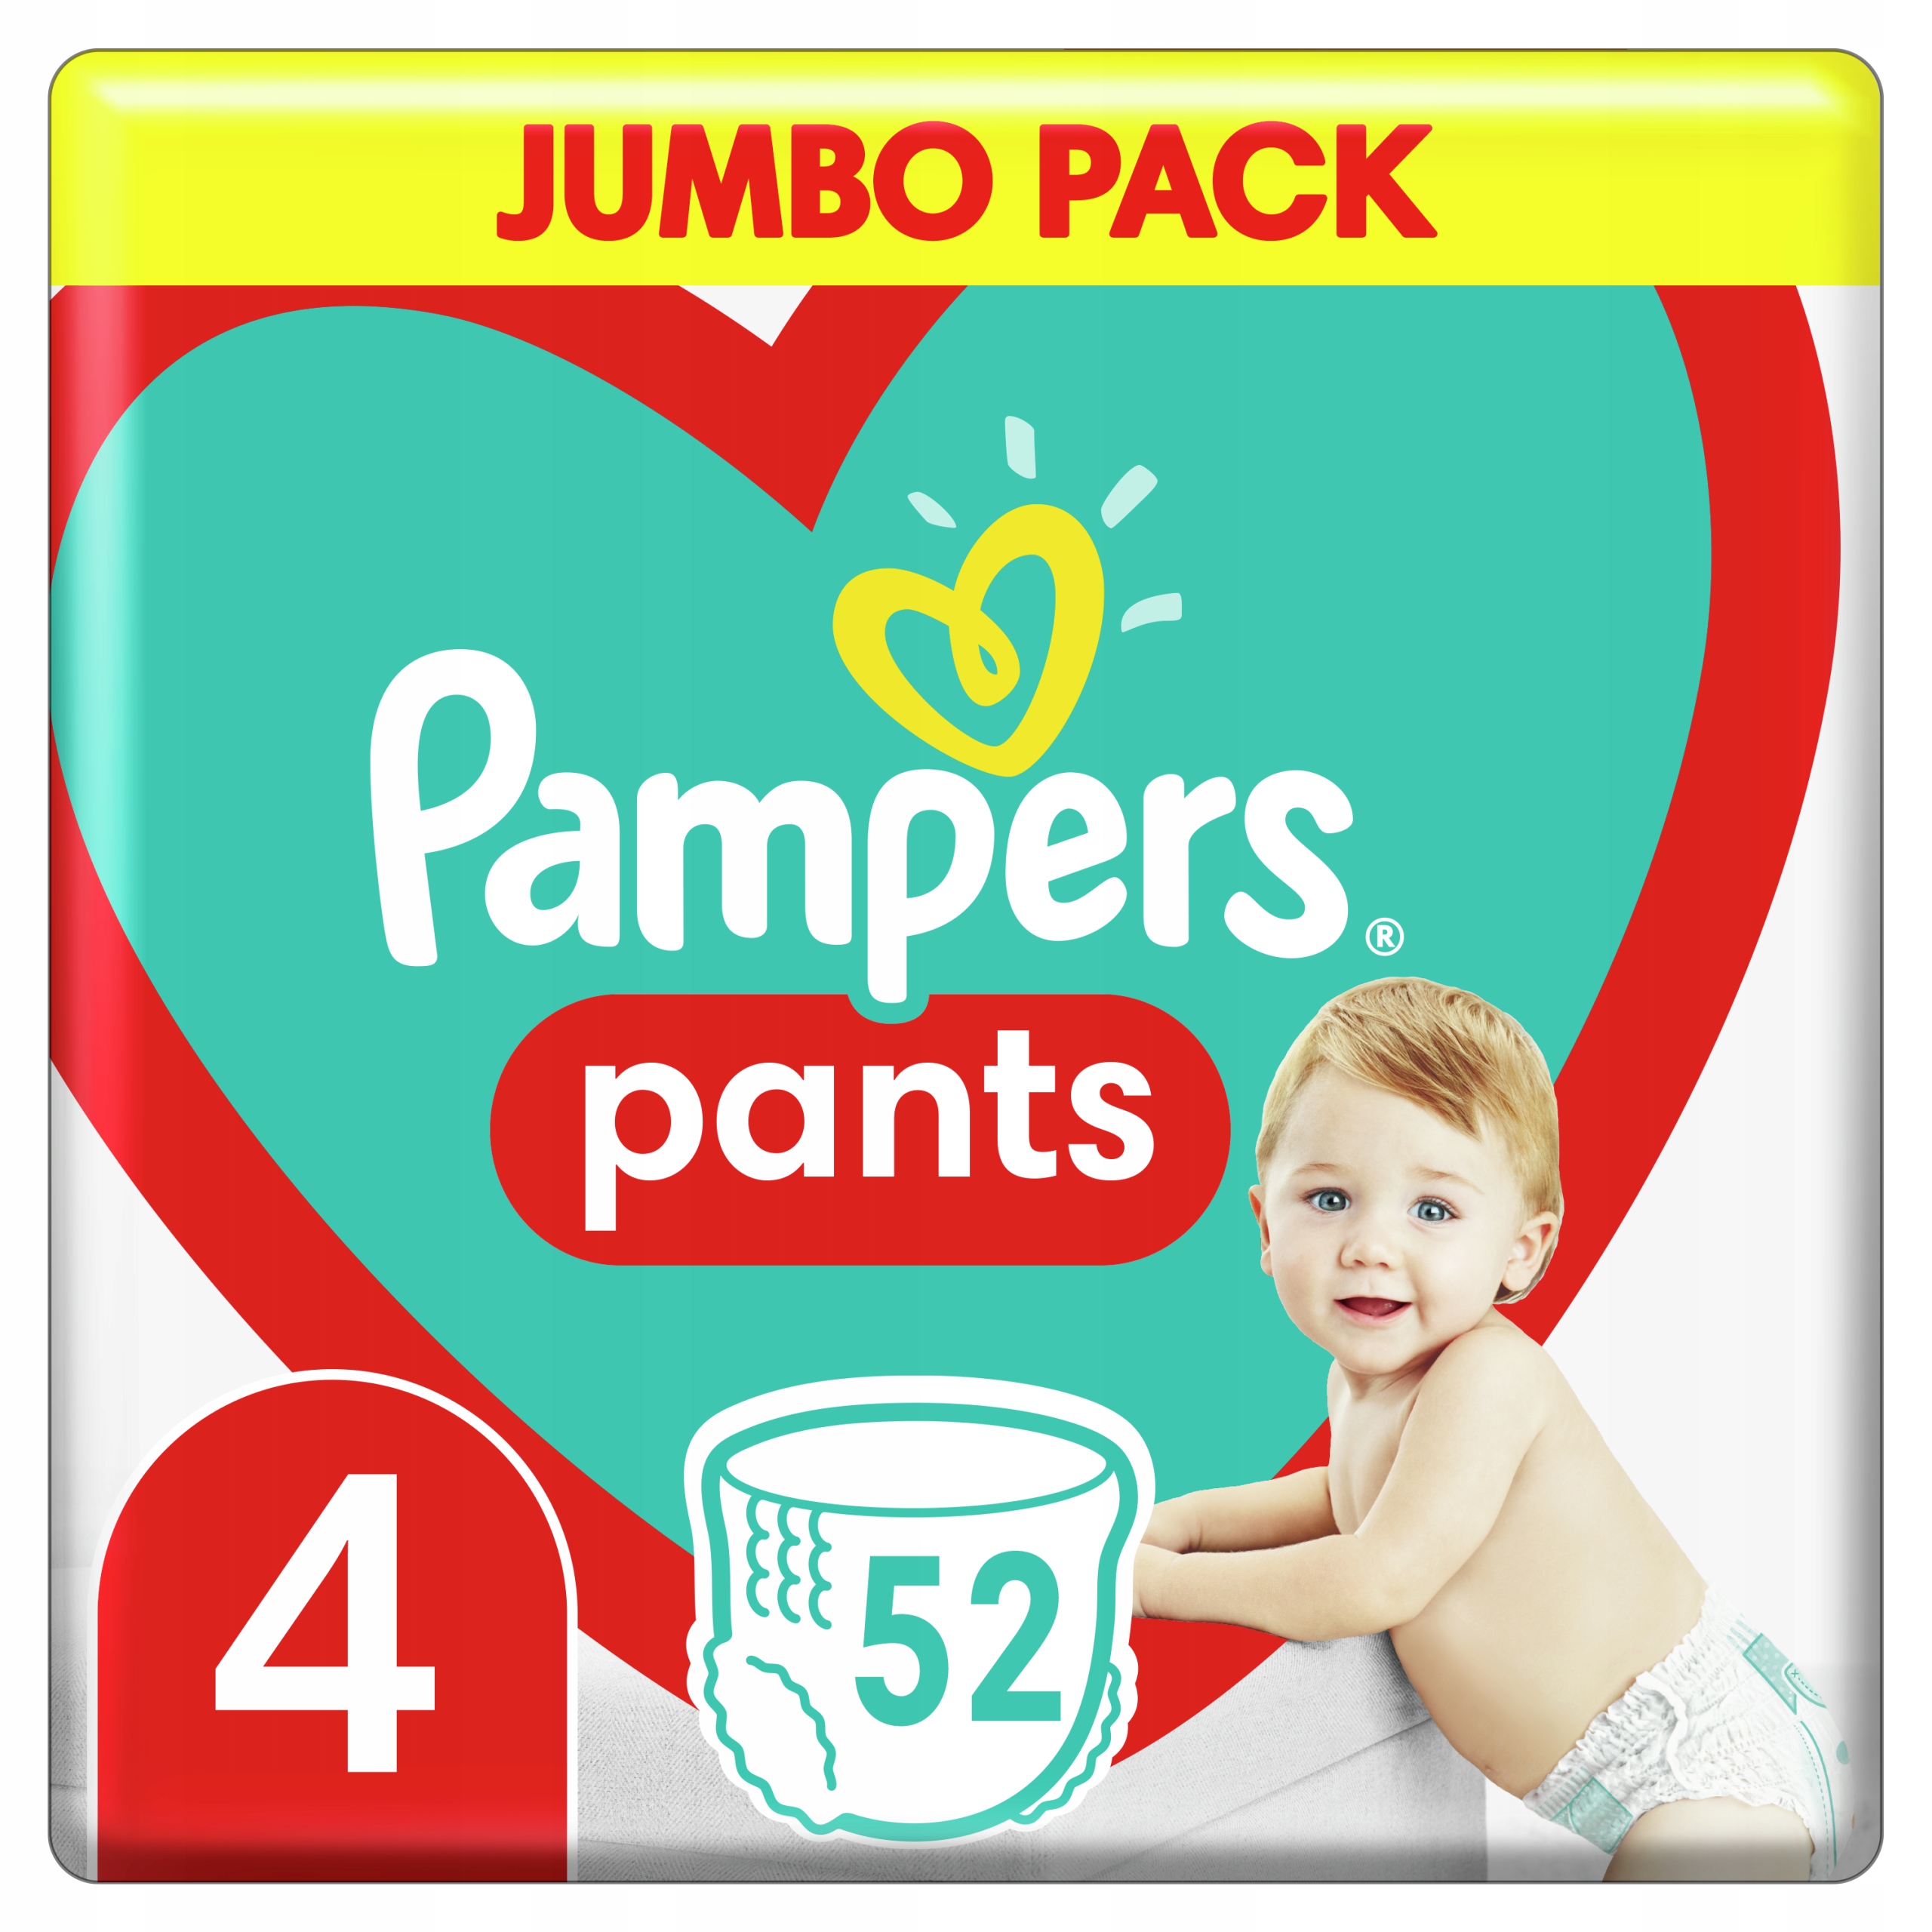 pampers 2019